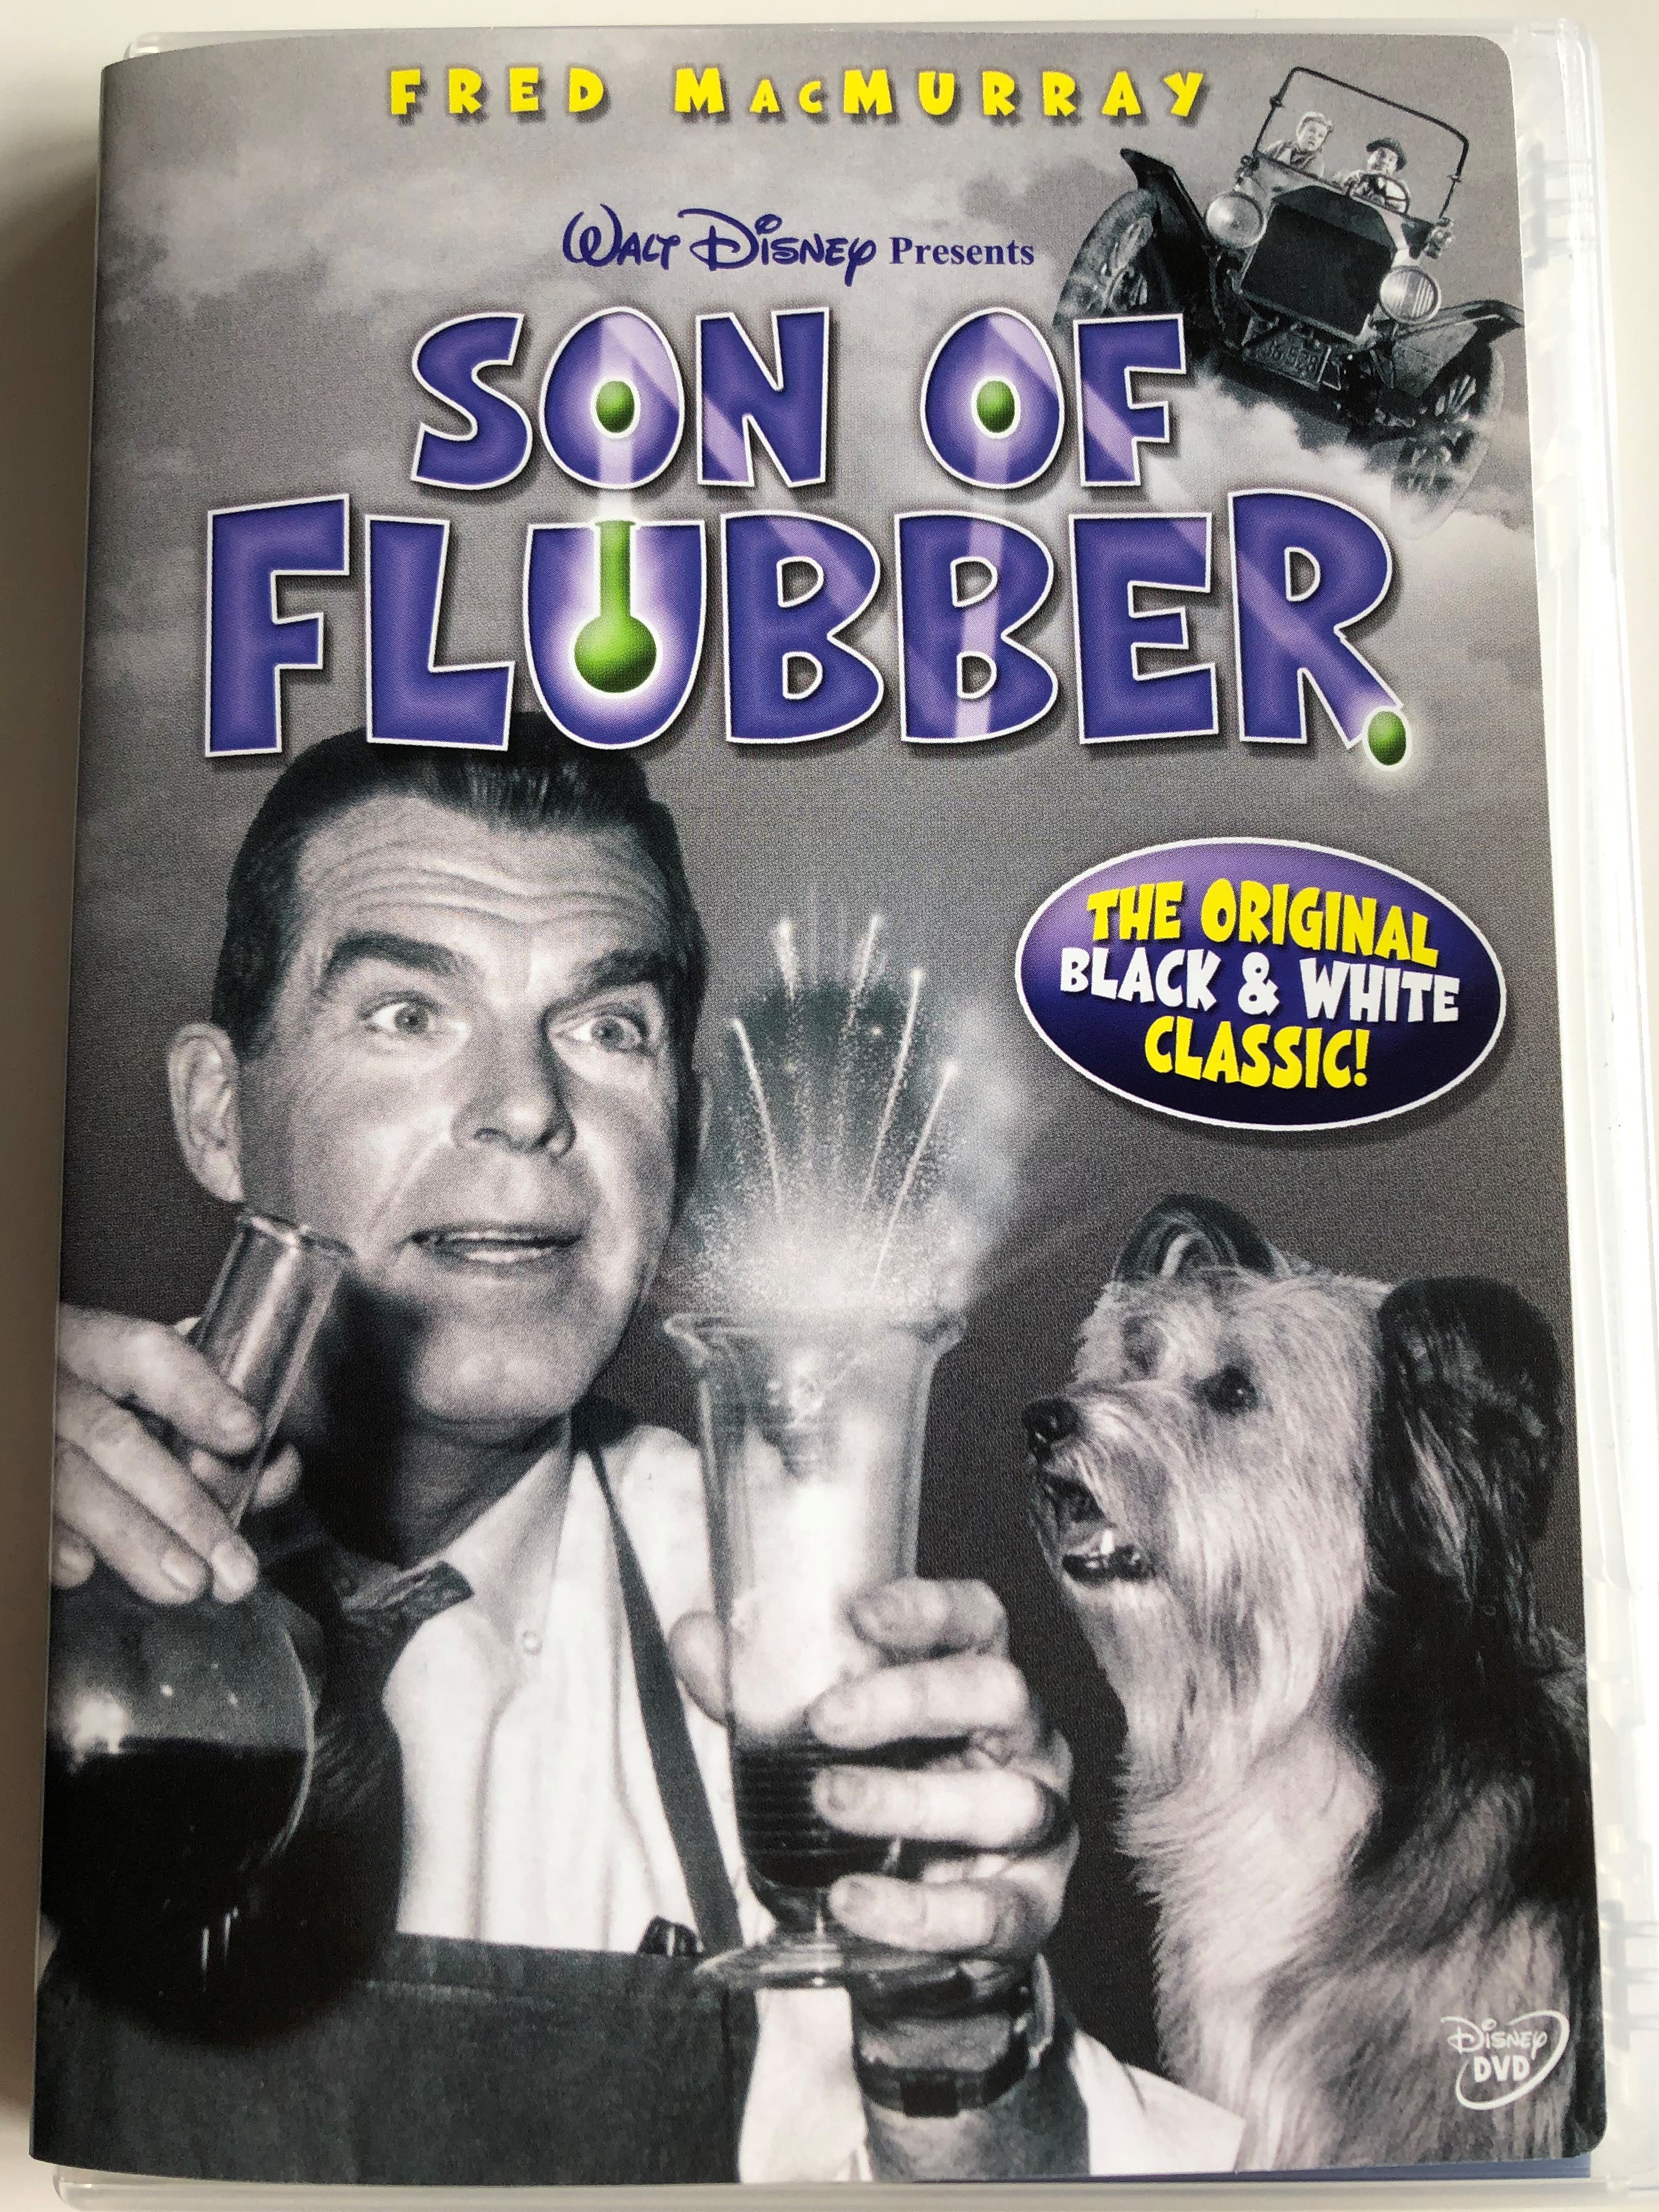 Son of Flubber DVD 1963 / Directed by Robert Stevenson / Starring Fred  MacMurray, Nancy Olson, Keenan Wynn / Original Black & White Classic / 2004  Release - Bible in My Language